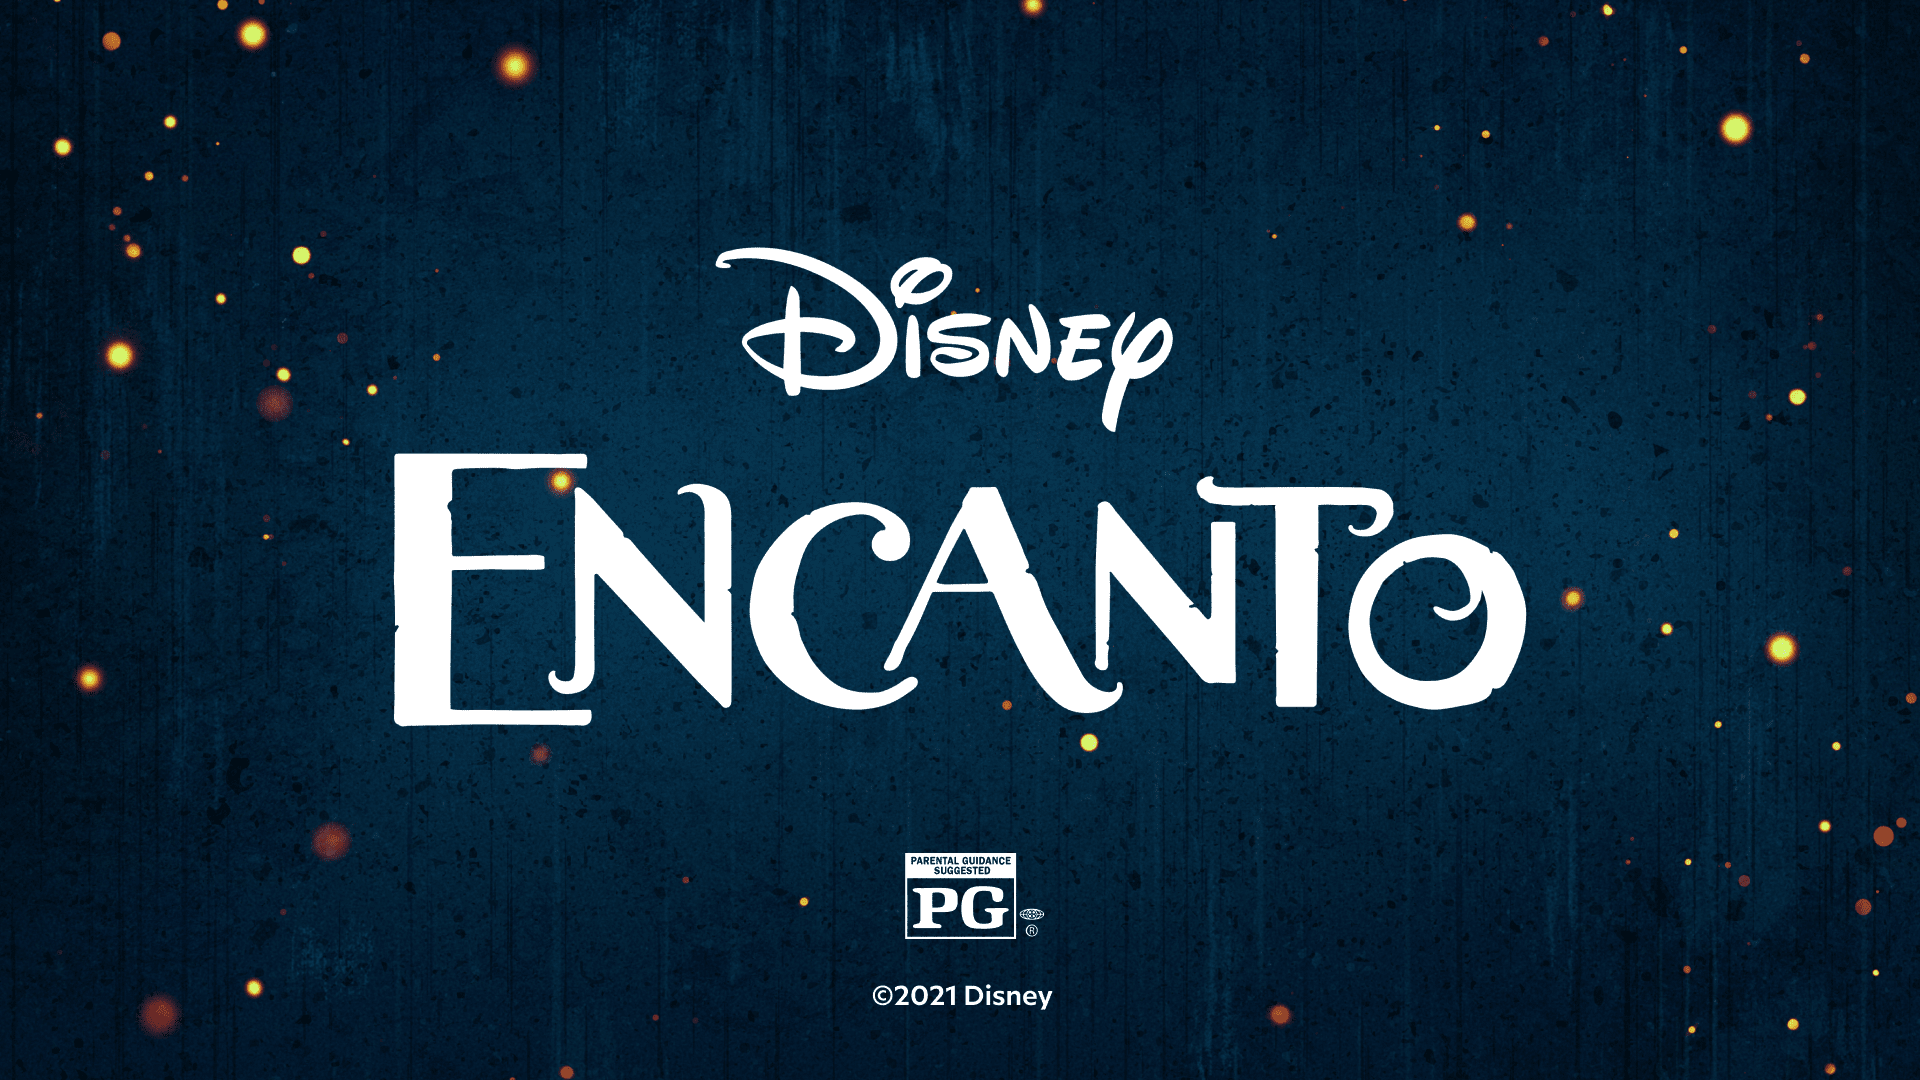 Babbel and Disney Team Up to Celebrate the Release of Disney's Encanto and Language's Role in Opening Doors to Discovery, Adventure and Understanding